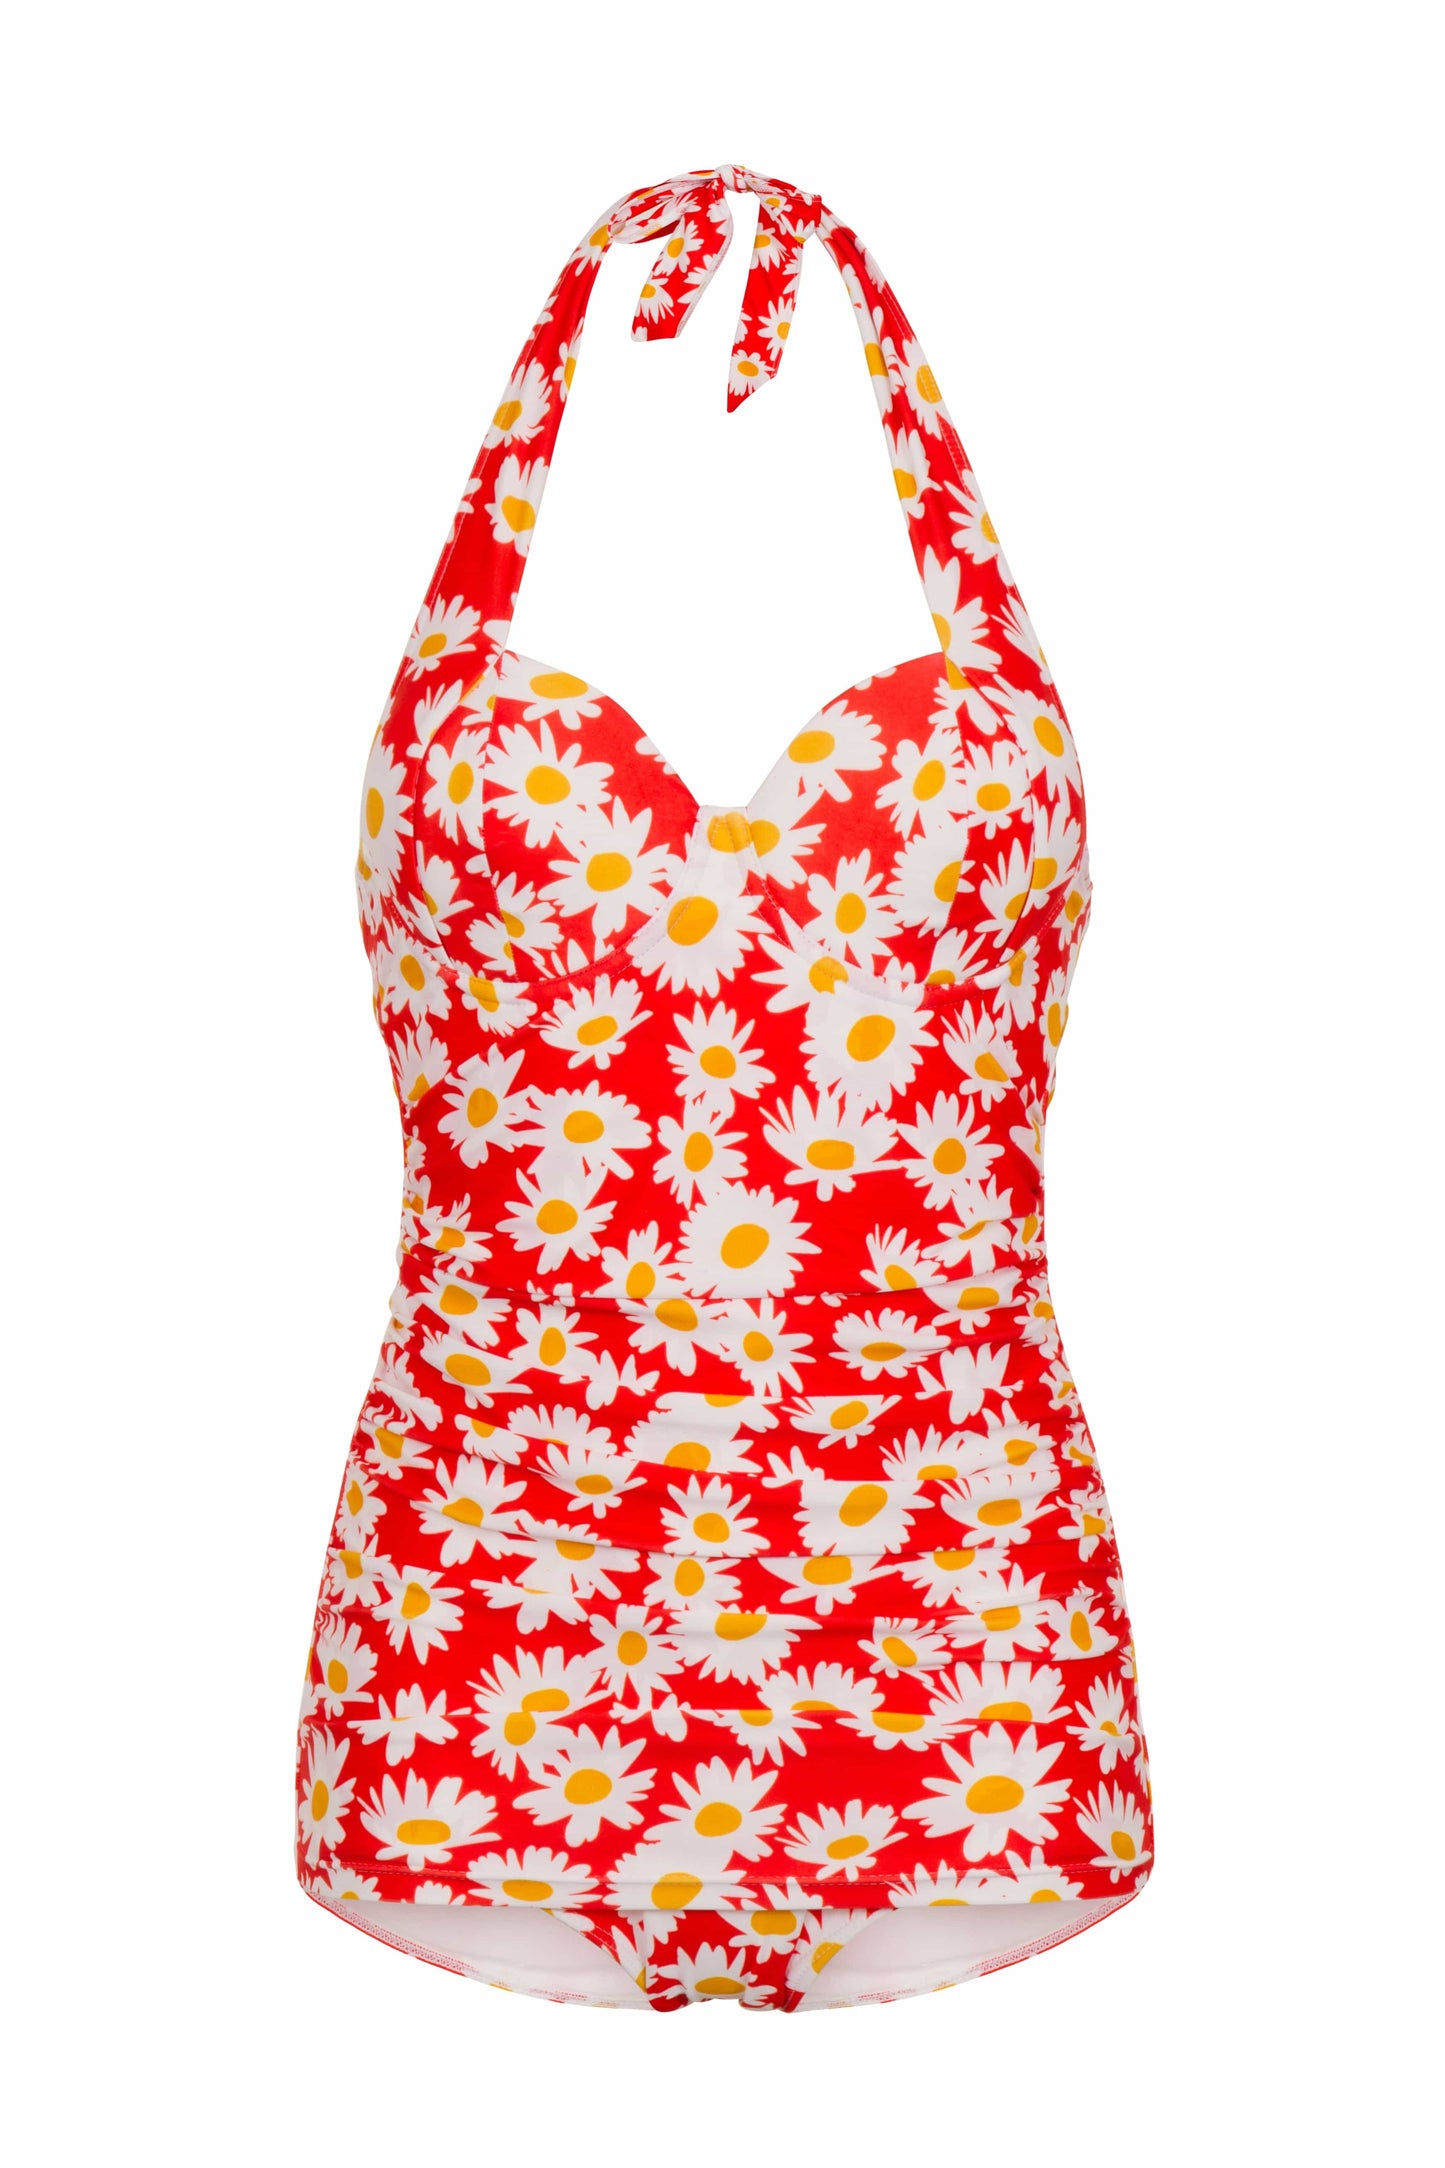 Bettylicious ECO Underwired Vintage Style with Daisy Print in Red Swim ...